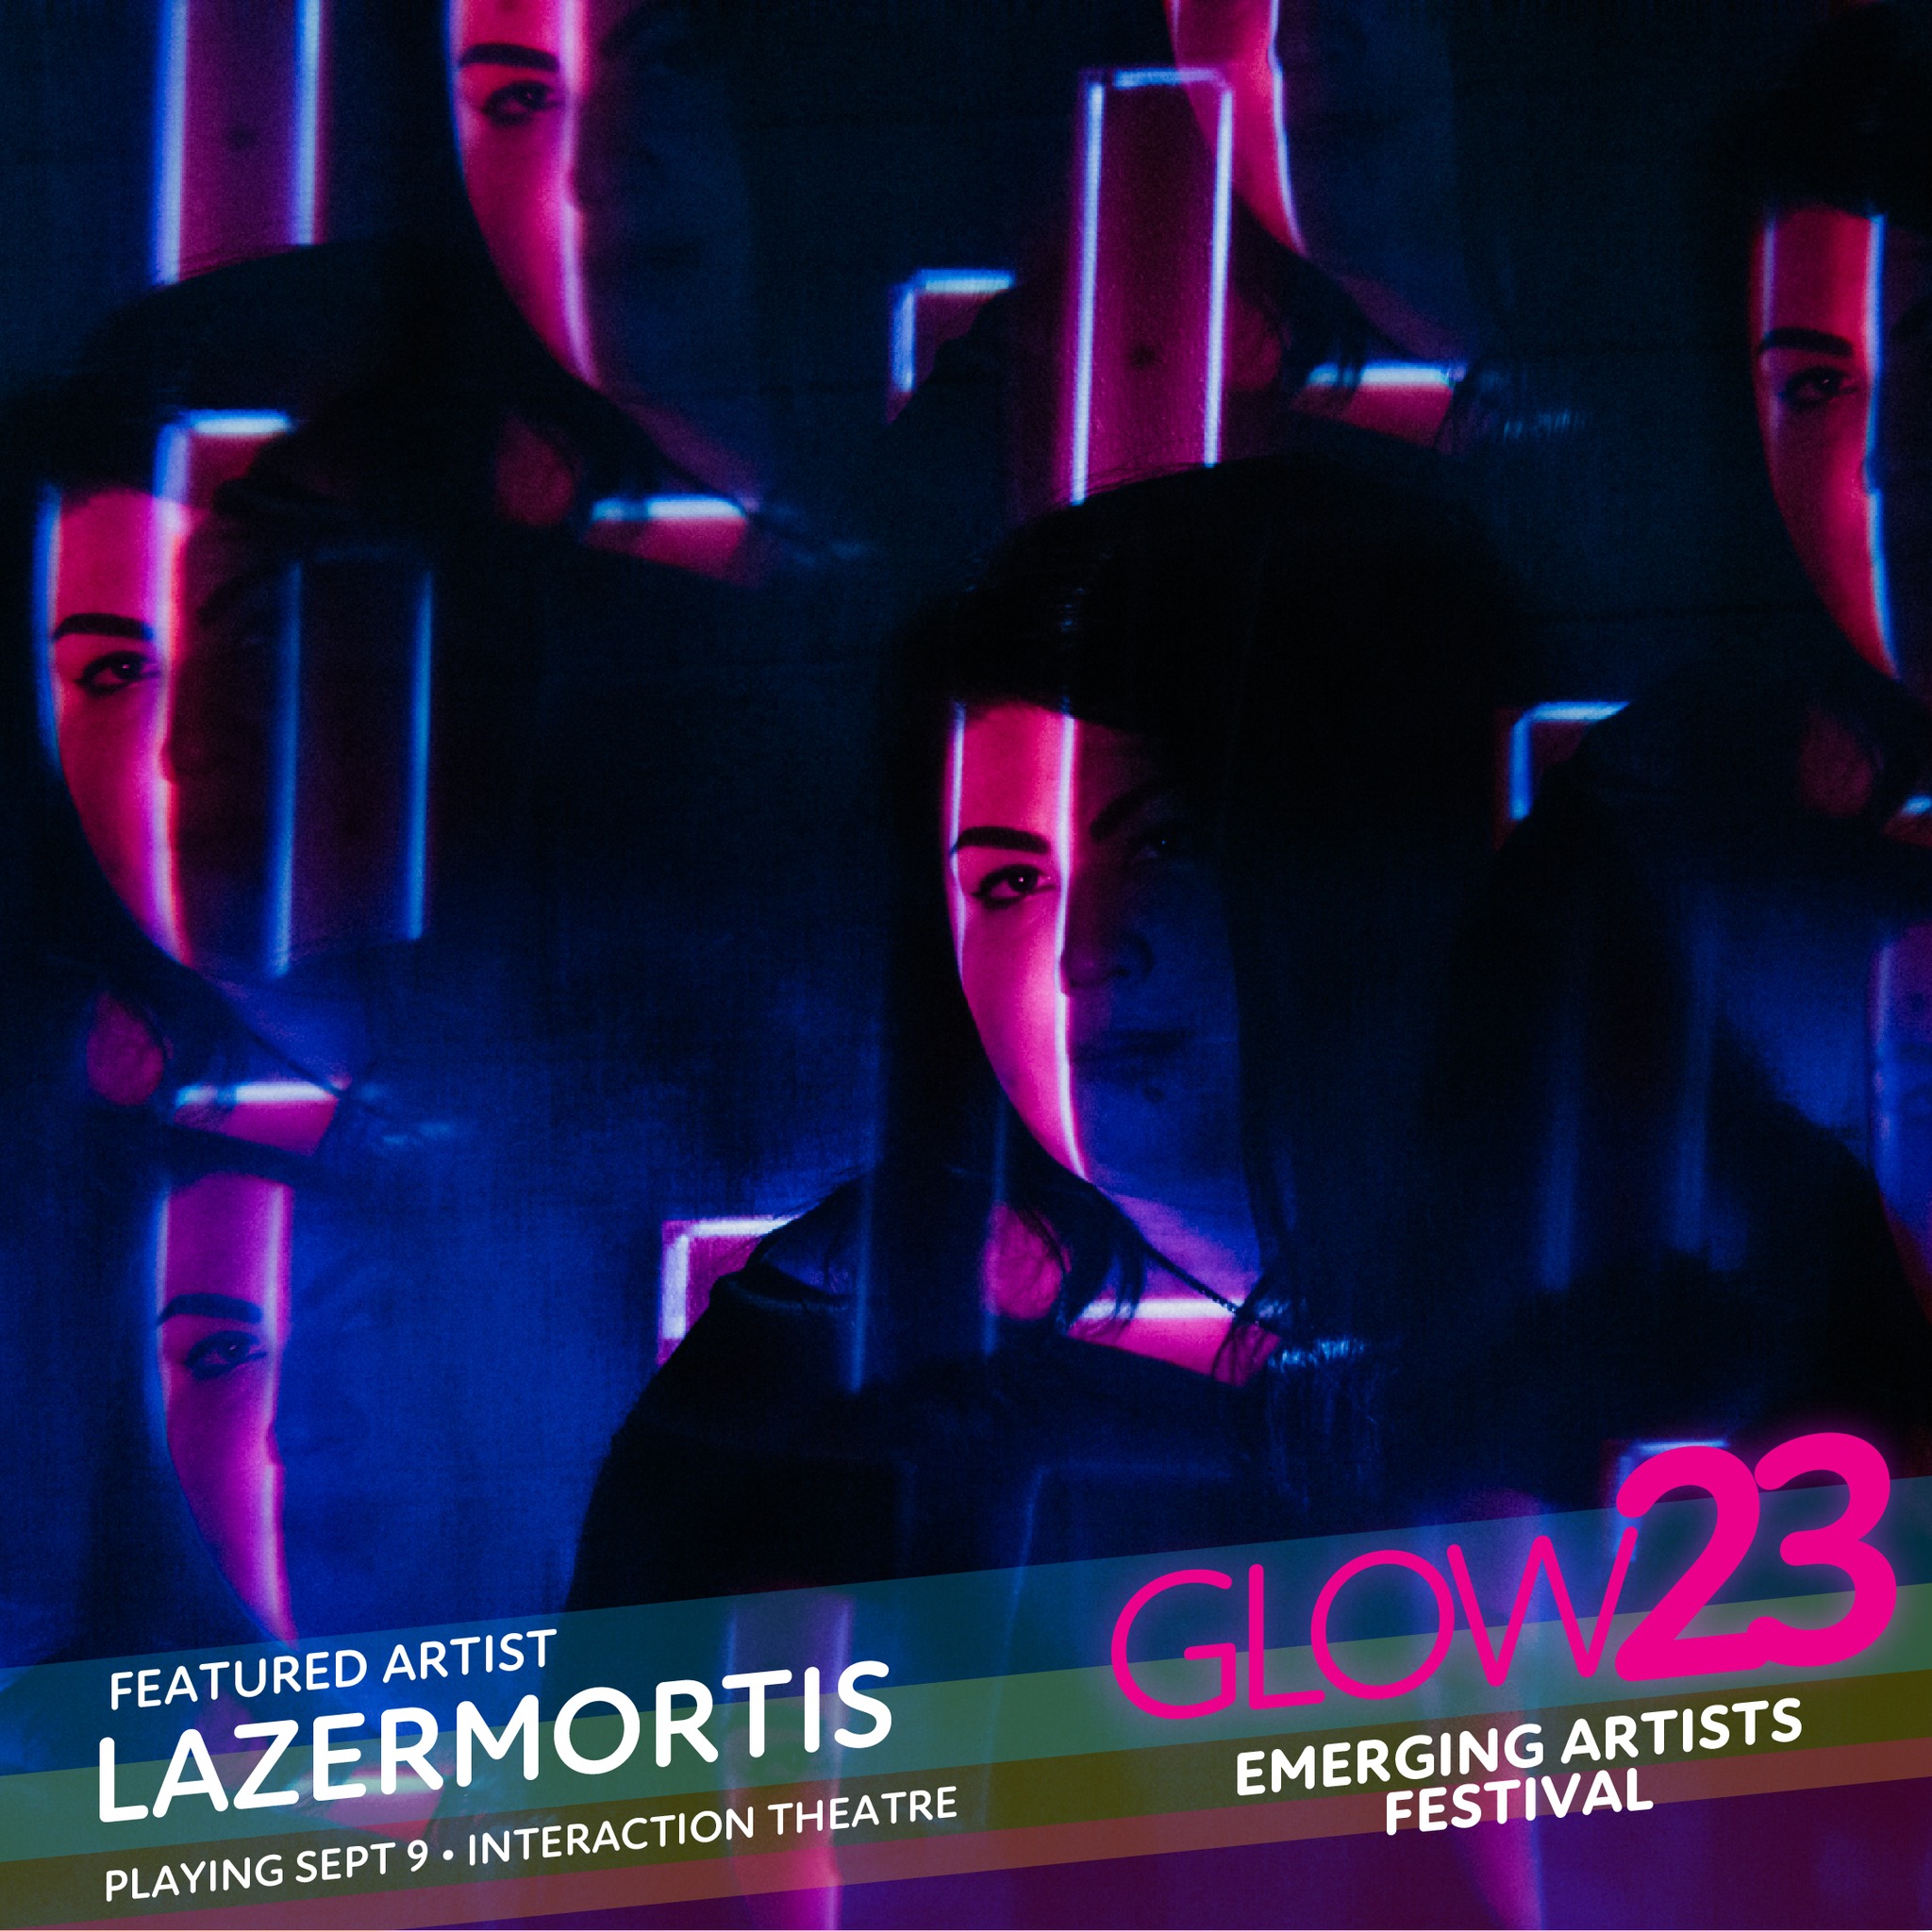 TONIGHT at GLOW Festival 
10:00 PM at Interaction Theatre

Lazermortis is an instrumental Synthwave producer based in Atlantic Canada. She fuses her experiences working in the funeral industry with her passion for retro-electronic music, exploring themes of organic death and artificial life through a melodic journey rooted in the past.

@lazermortis_music 
@interaction_performingarts 
#GLOW23 

TICKETS (Buy online at industrialparks.ca)
$10 Advance
$15 Door
$30 Festival Pass